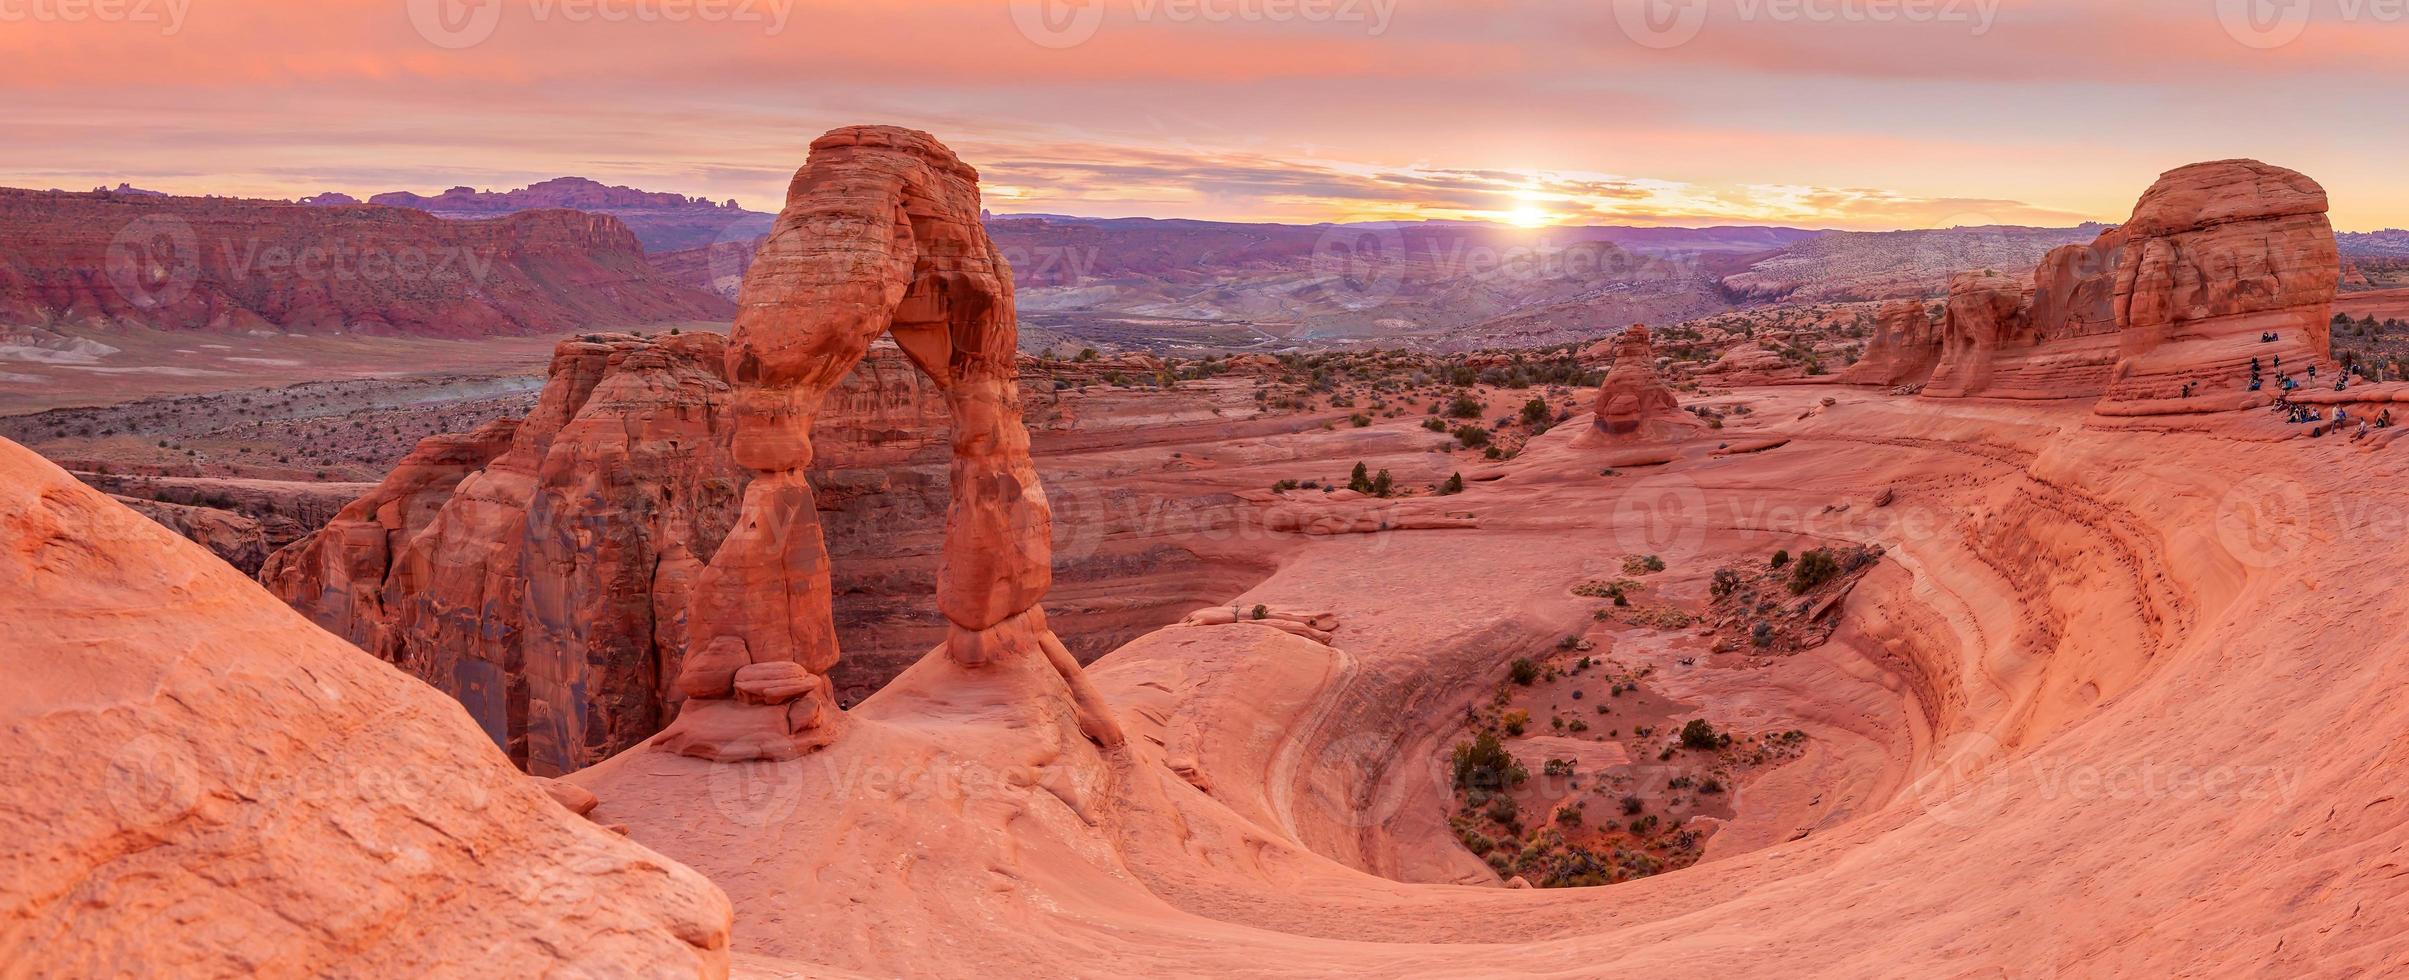 Delicate Arch at Arches National Park in Utah USA photo